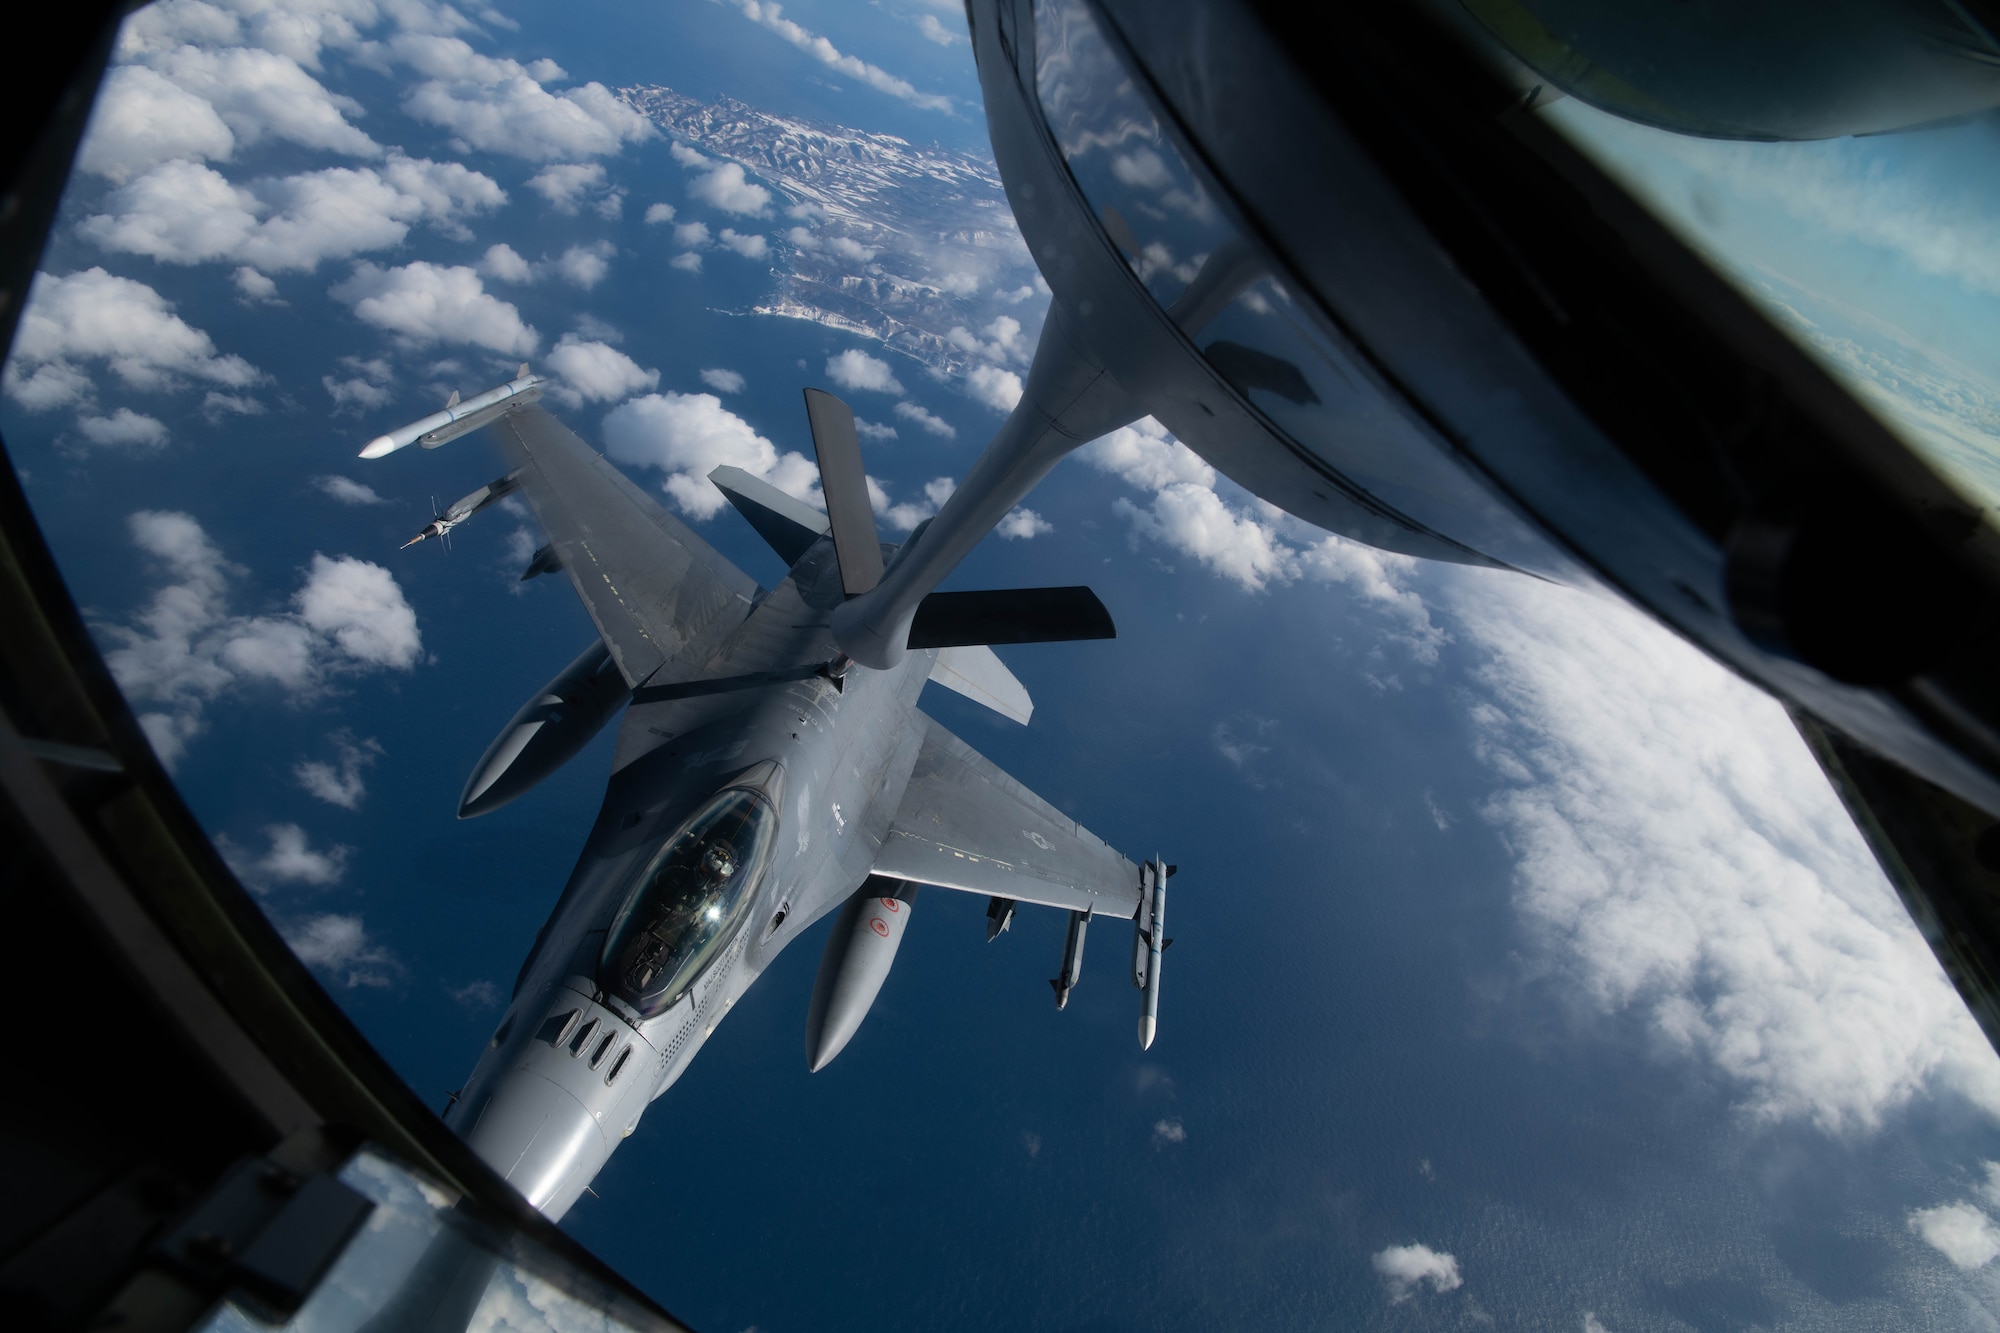 An aircraft conducts aerial refueling.